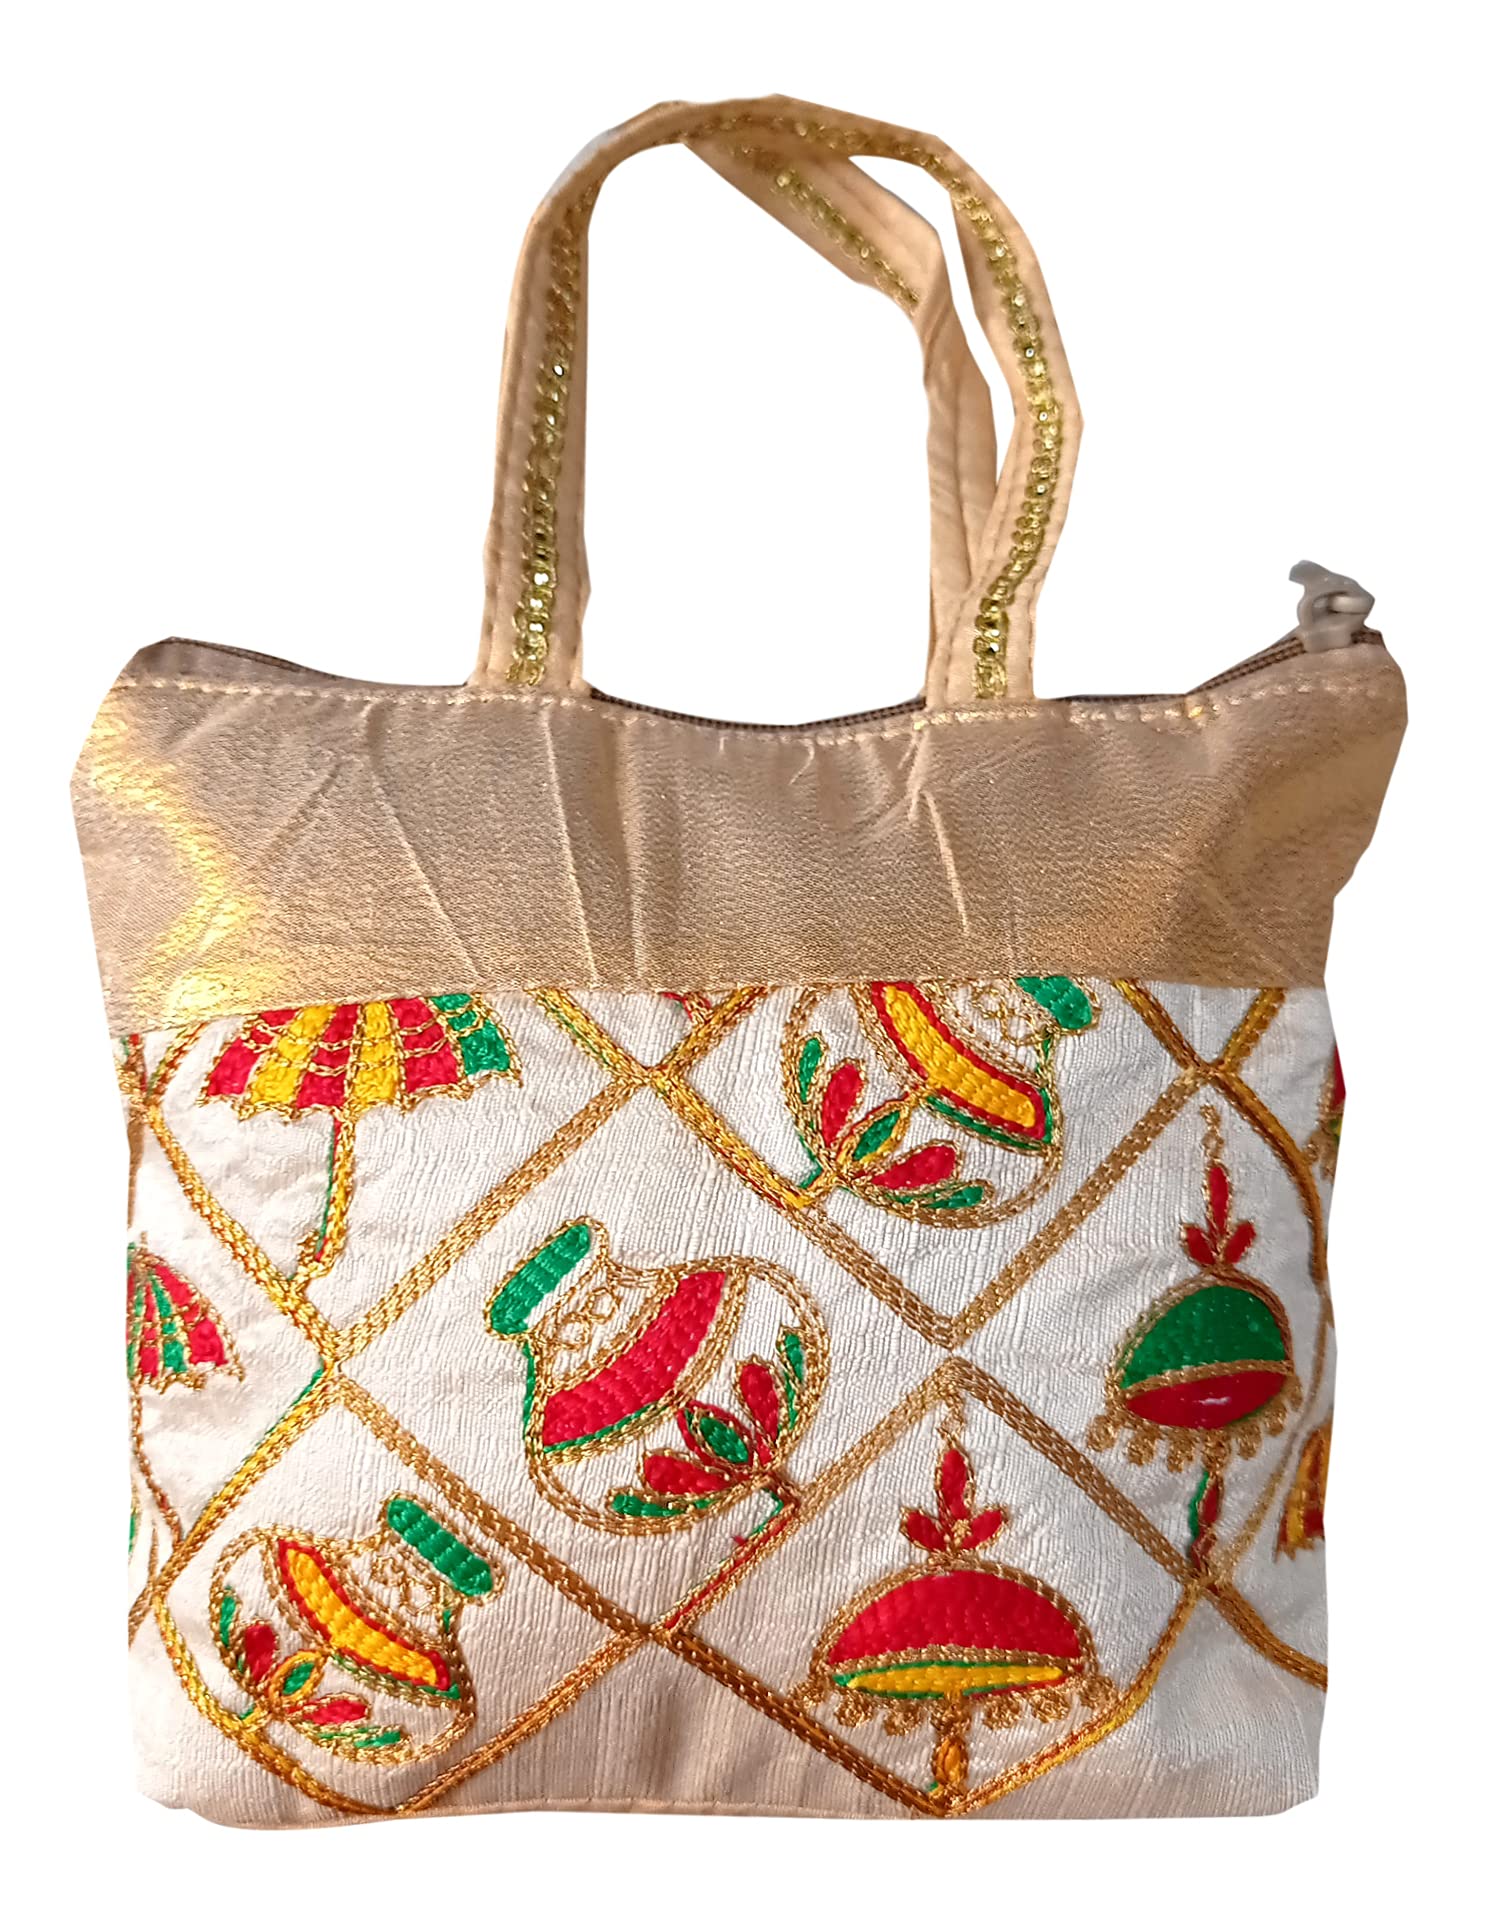 Kuber Industries Embroidery Small Hand Bag, Tote Bag For Women & Girls (Gold)-HS_38_KUBMART21478, Pack of 1